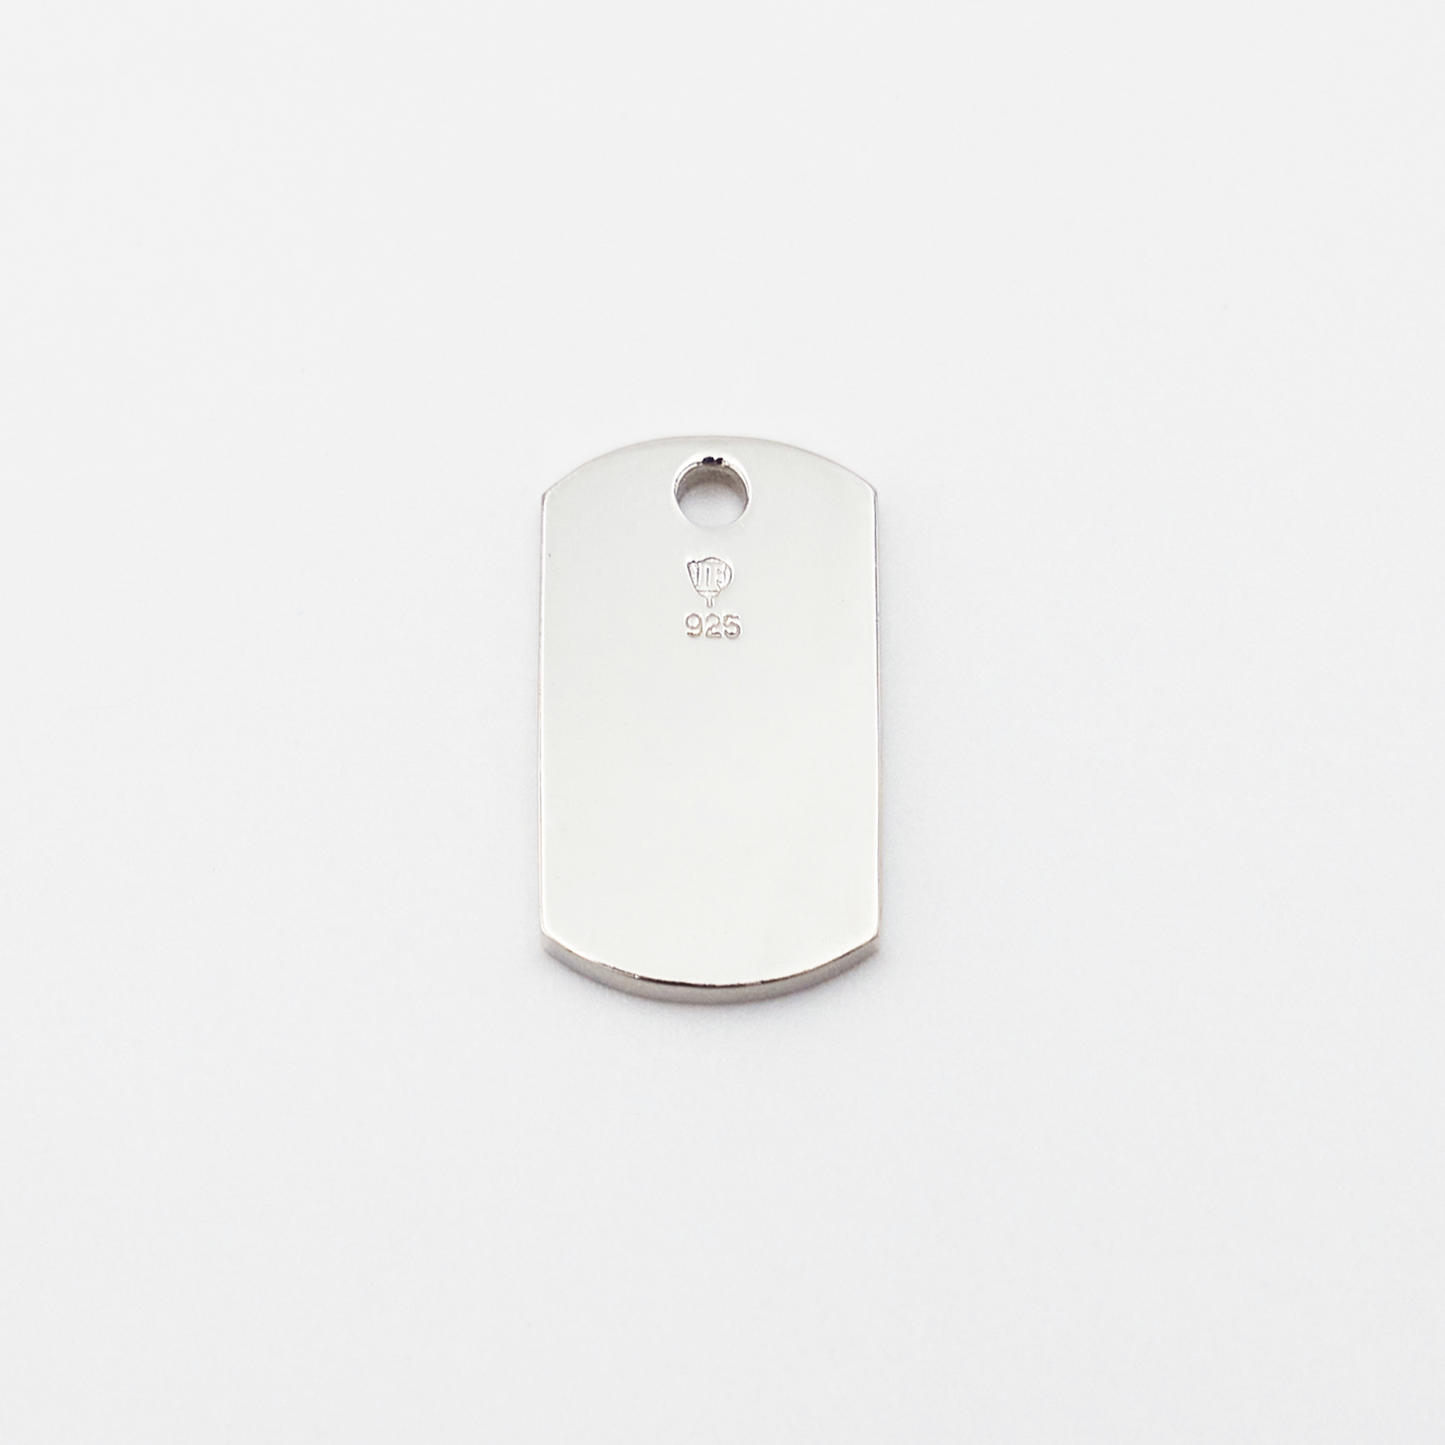 Plate-S ID Tag